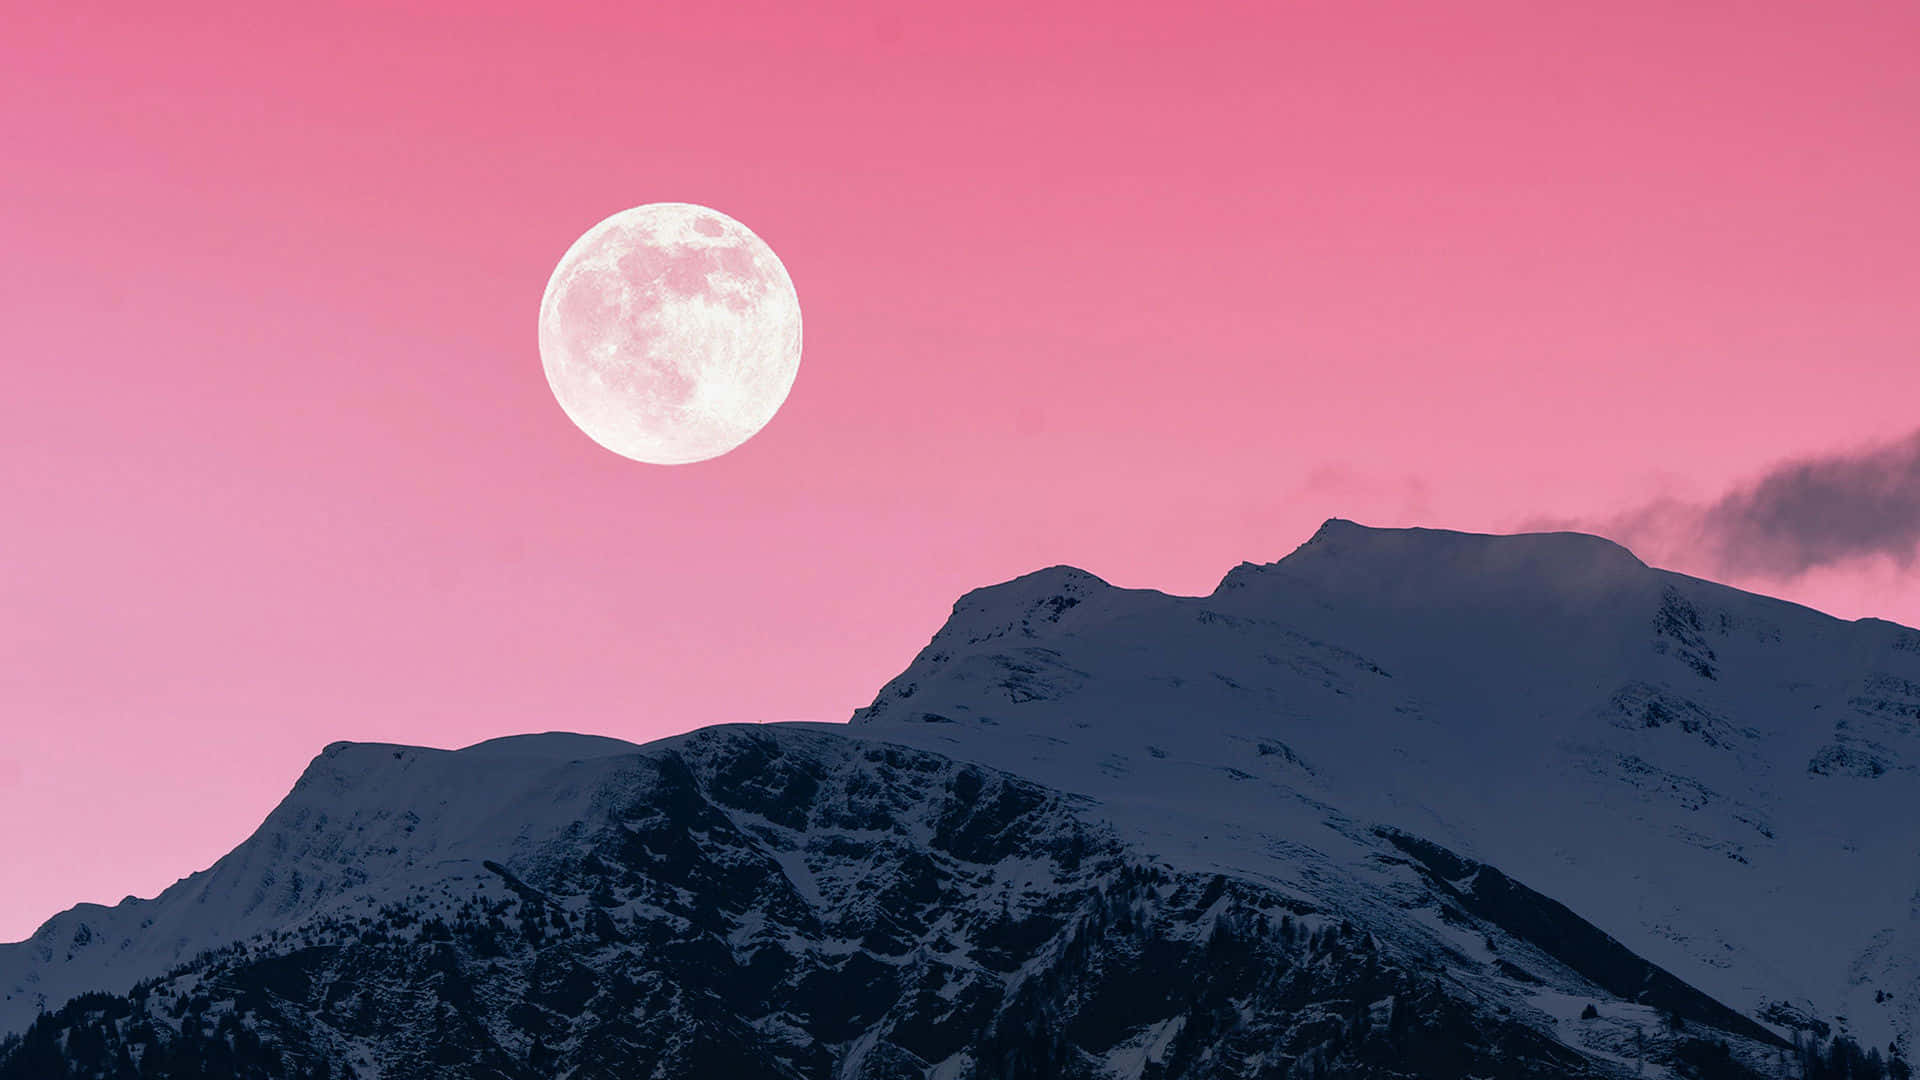 A magnificent view of a pink moon appearing in the star-filled night sky Wallpaper